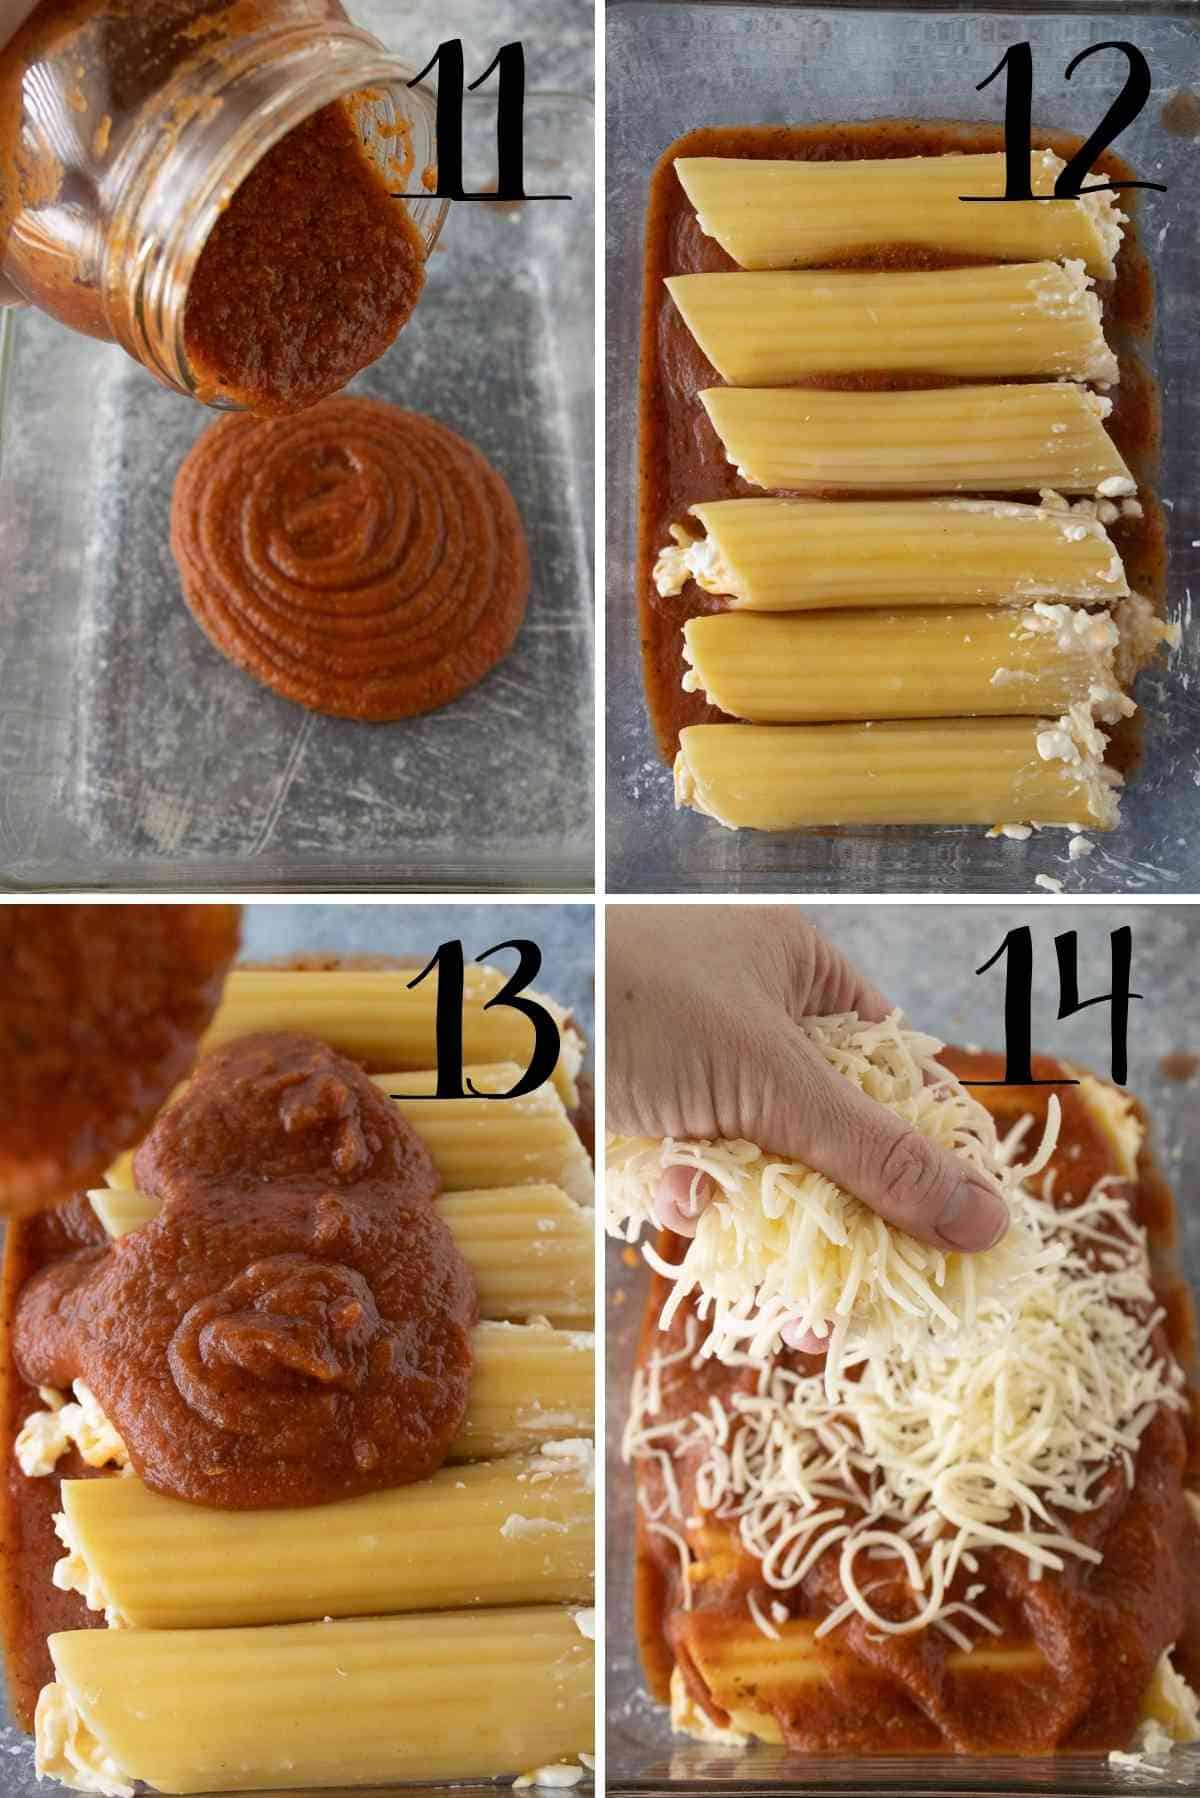 Stuffed manicotti shells placed in a baking dish then topped with sauce and cheese.